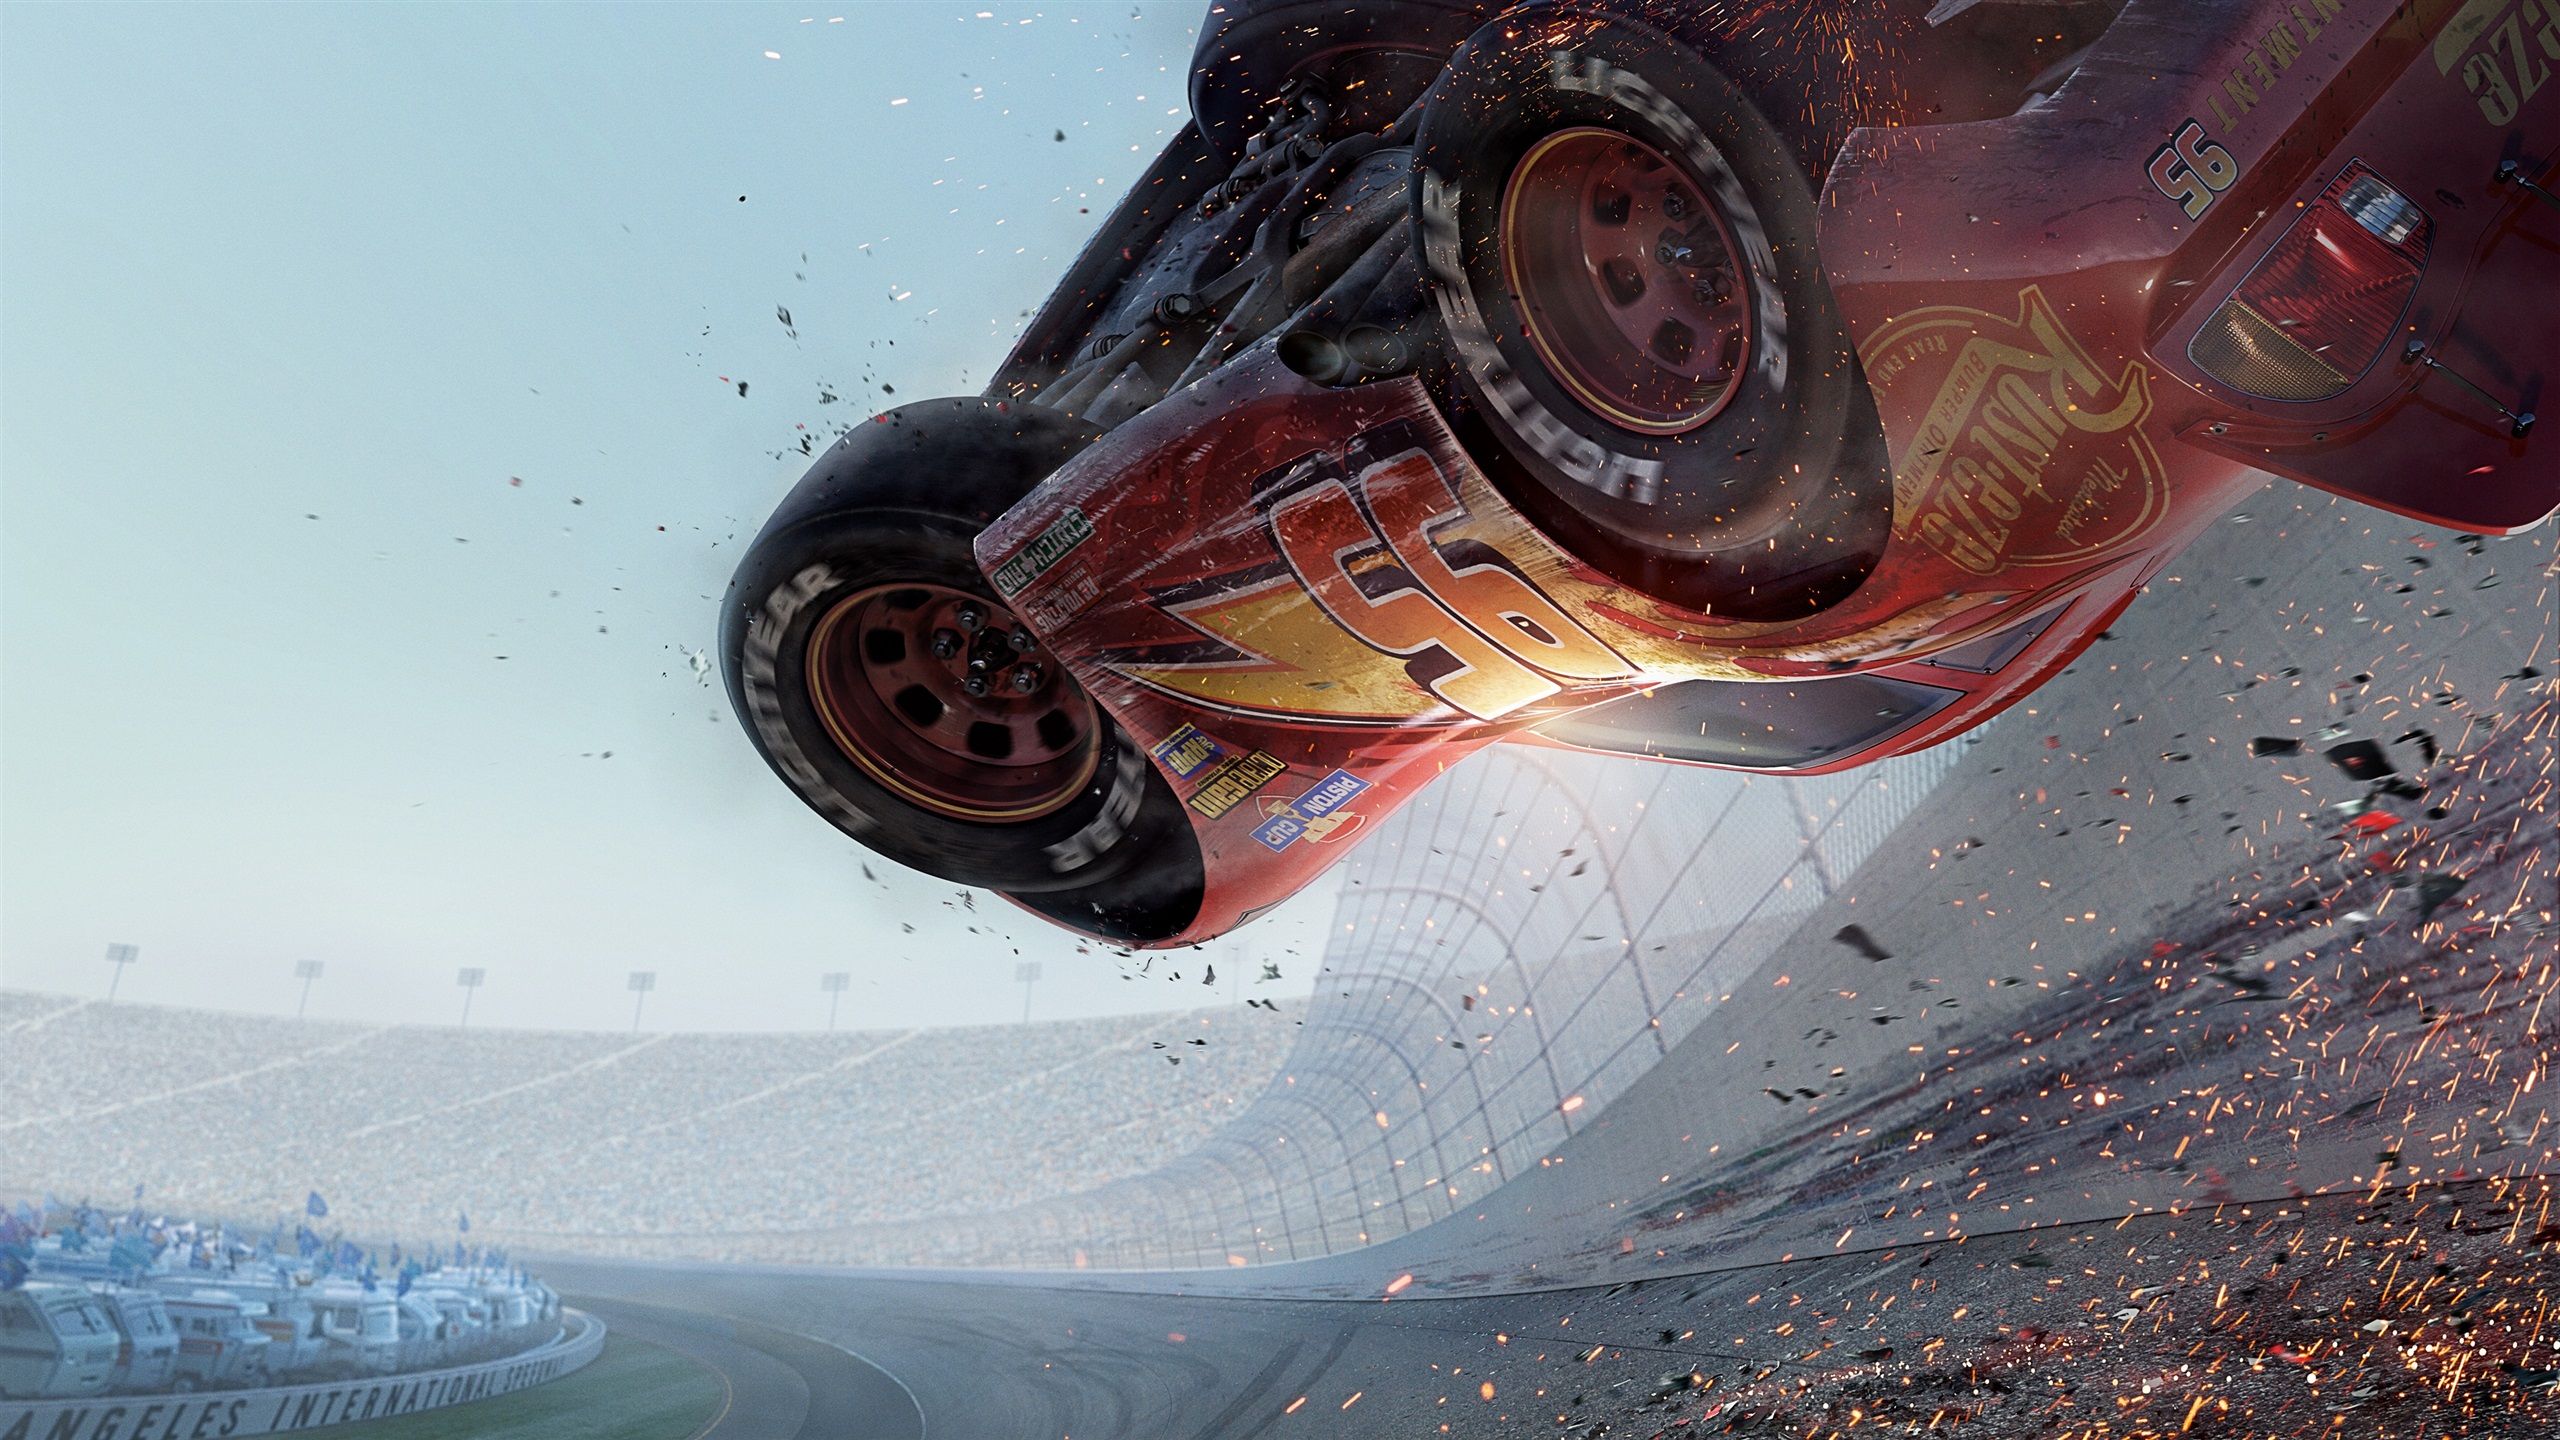 2560x1440 Wallpaper Cars 3 Race Car Accident 3840x2160 Uhd 4k Picture Image